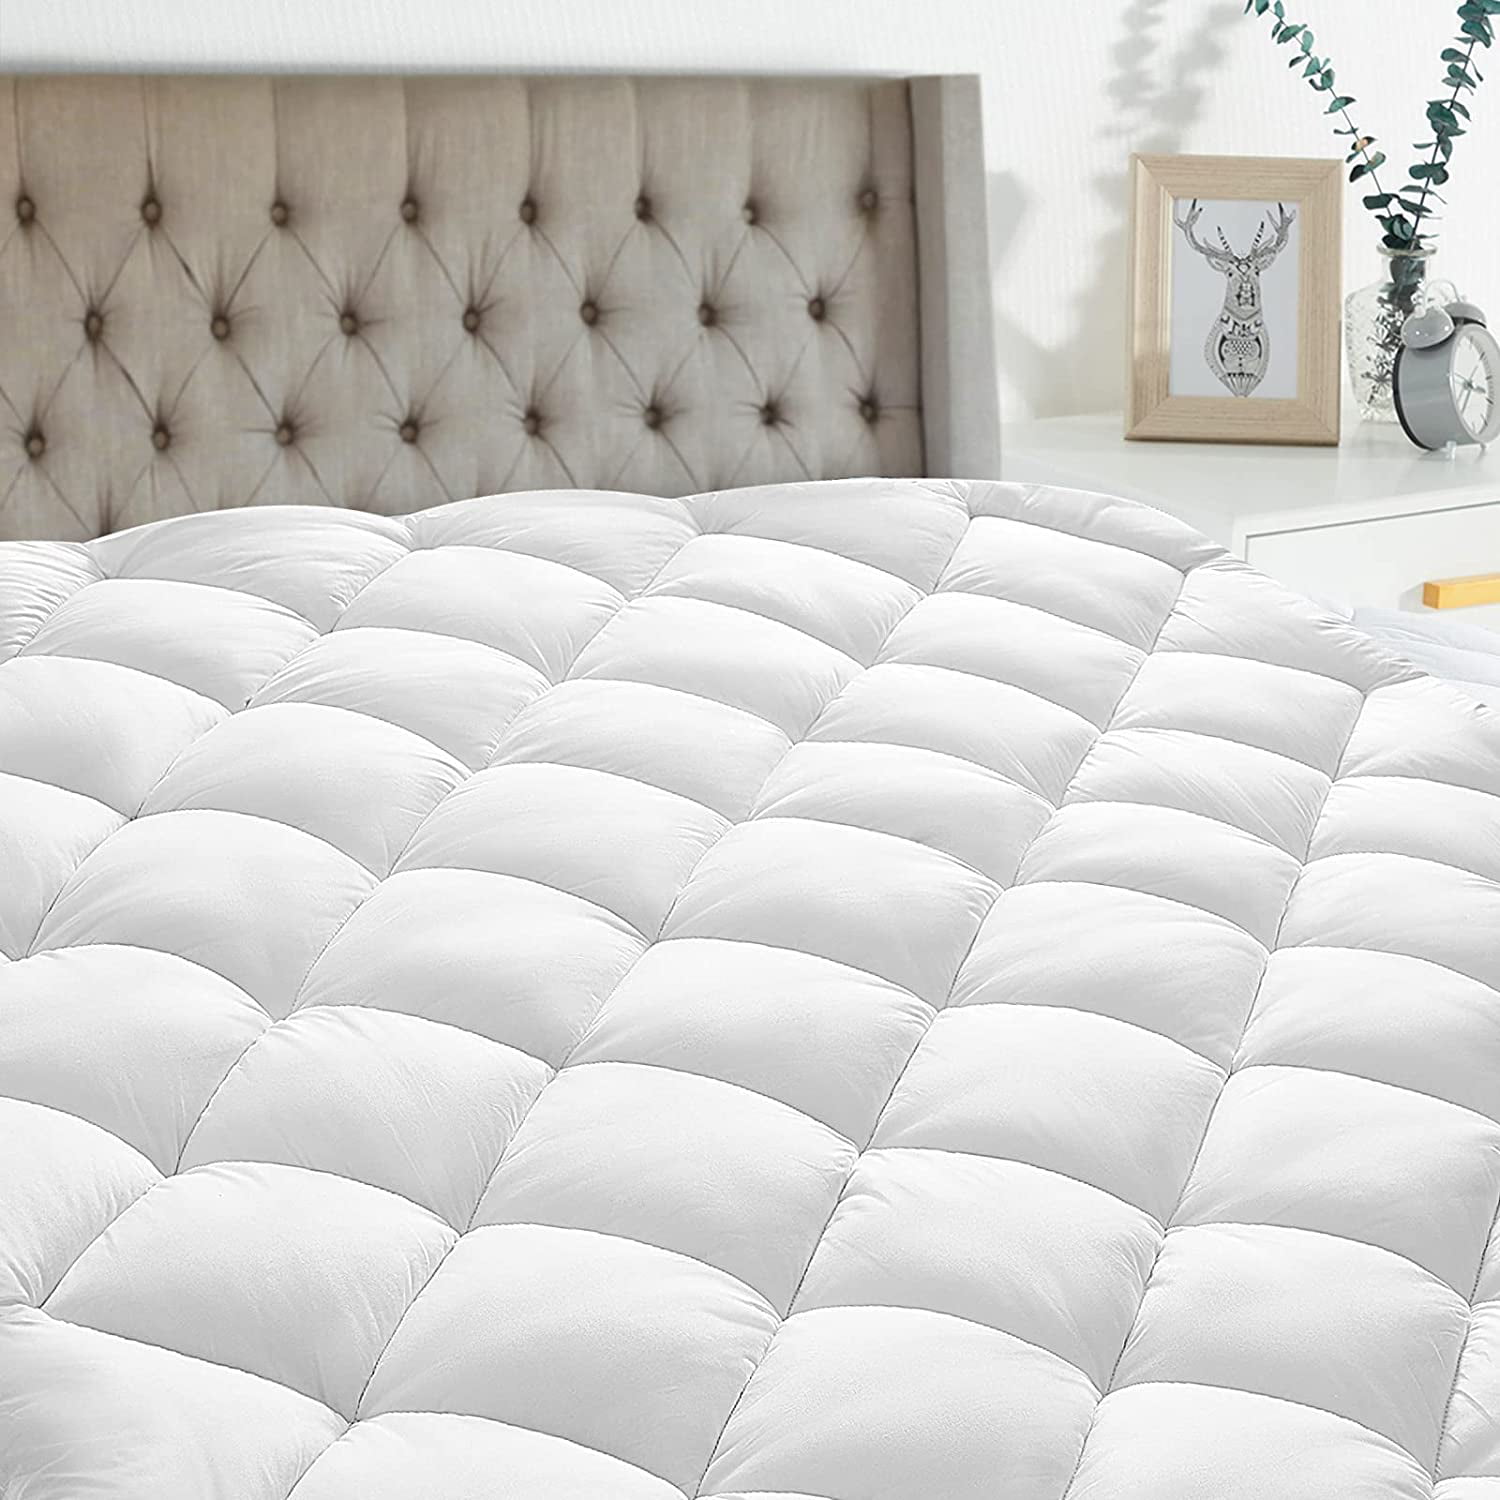 Deep Pocket Fits 8-21 Thick Mattress Meritlife Queen Mattress Pad Cooling Mattress Topper Pillow Top Fitted Quilted Mattress Cover with Fitted Skirt Stretches Up to 21 Inches